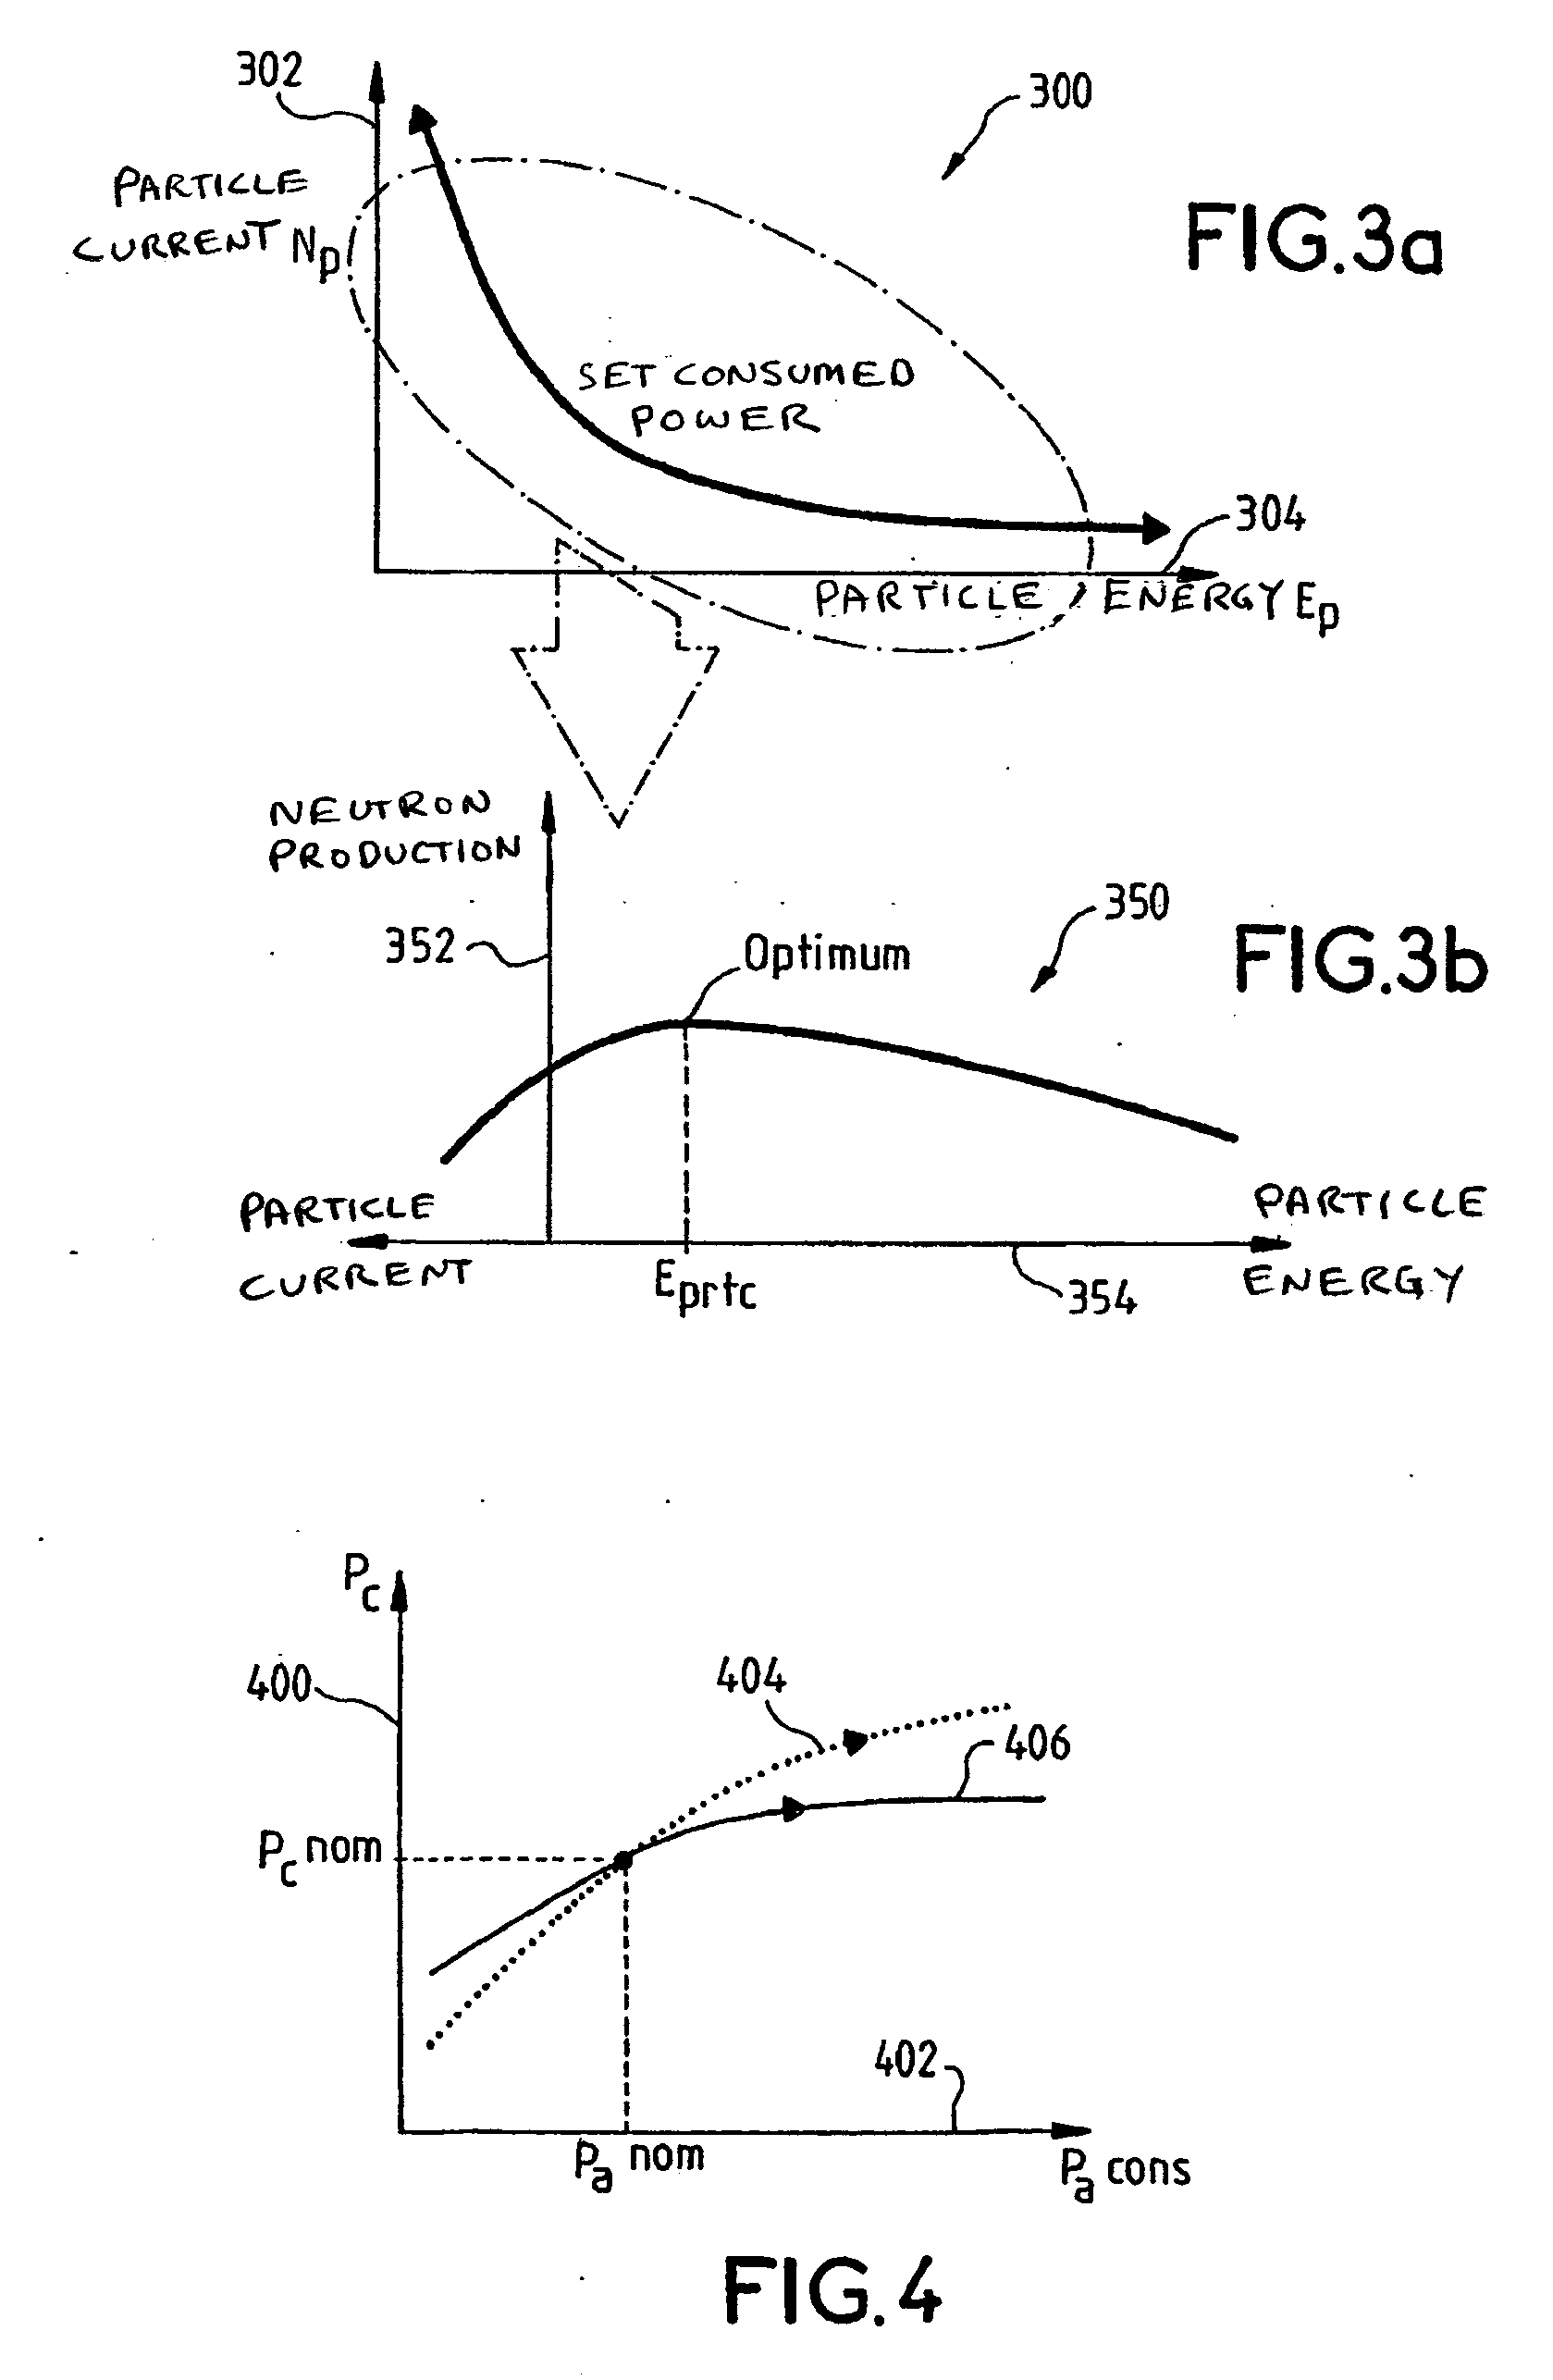 Method of improving the safety of accelerator coupled hybrid nuclear systems, and device for implementing same